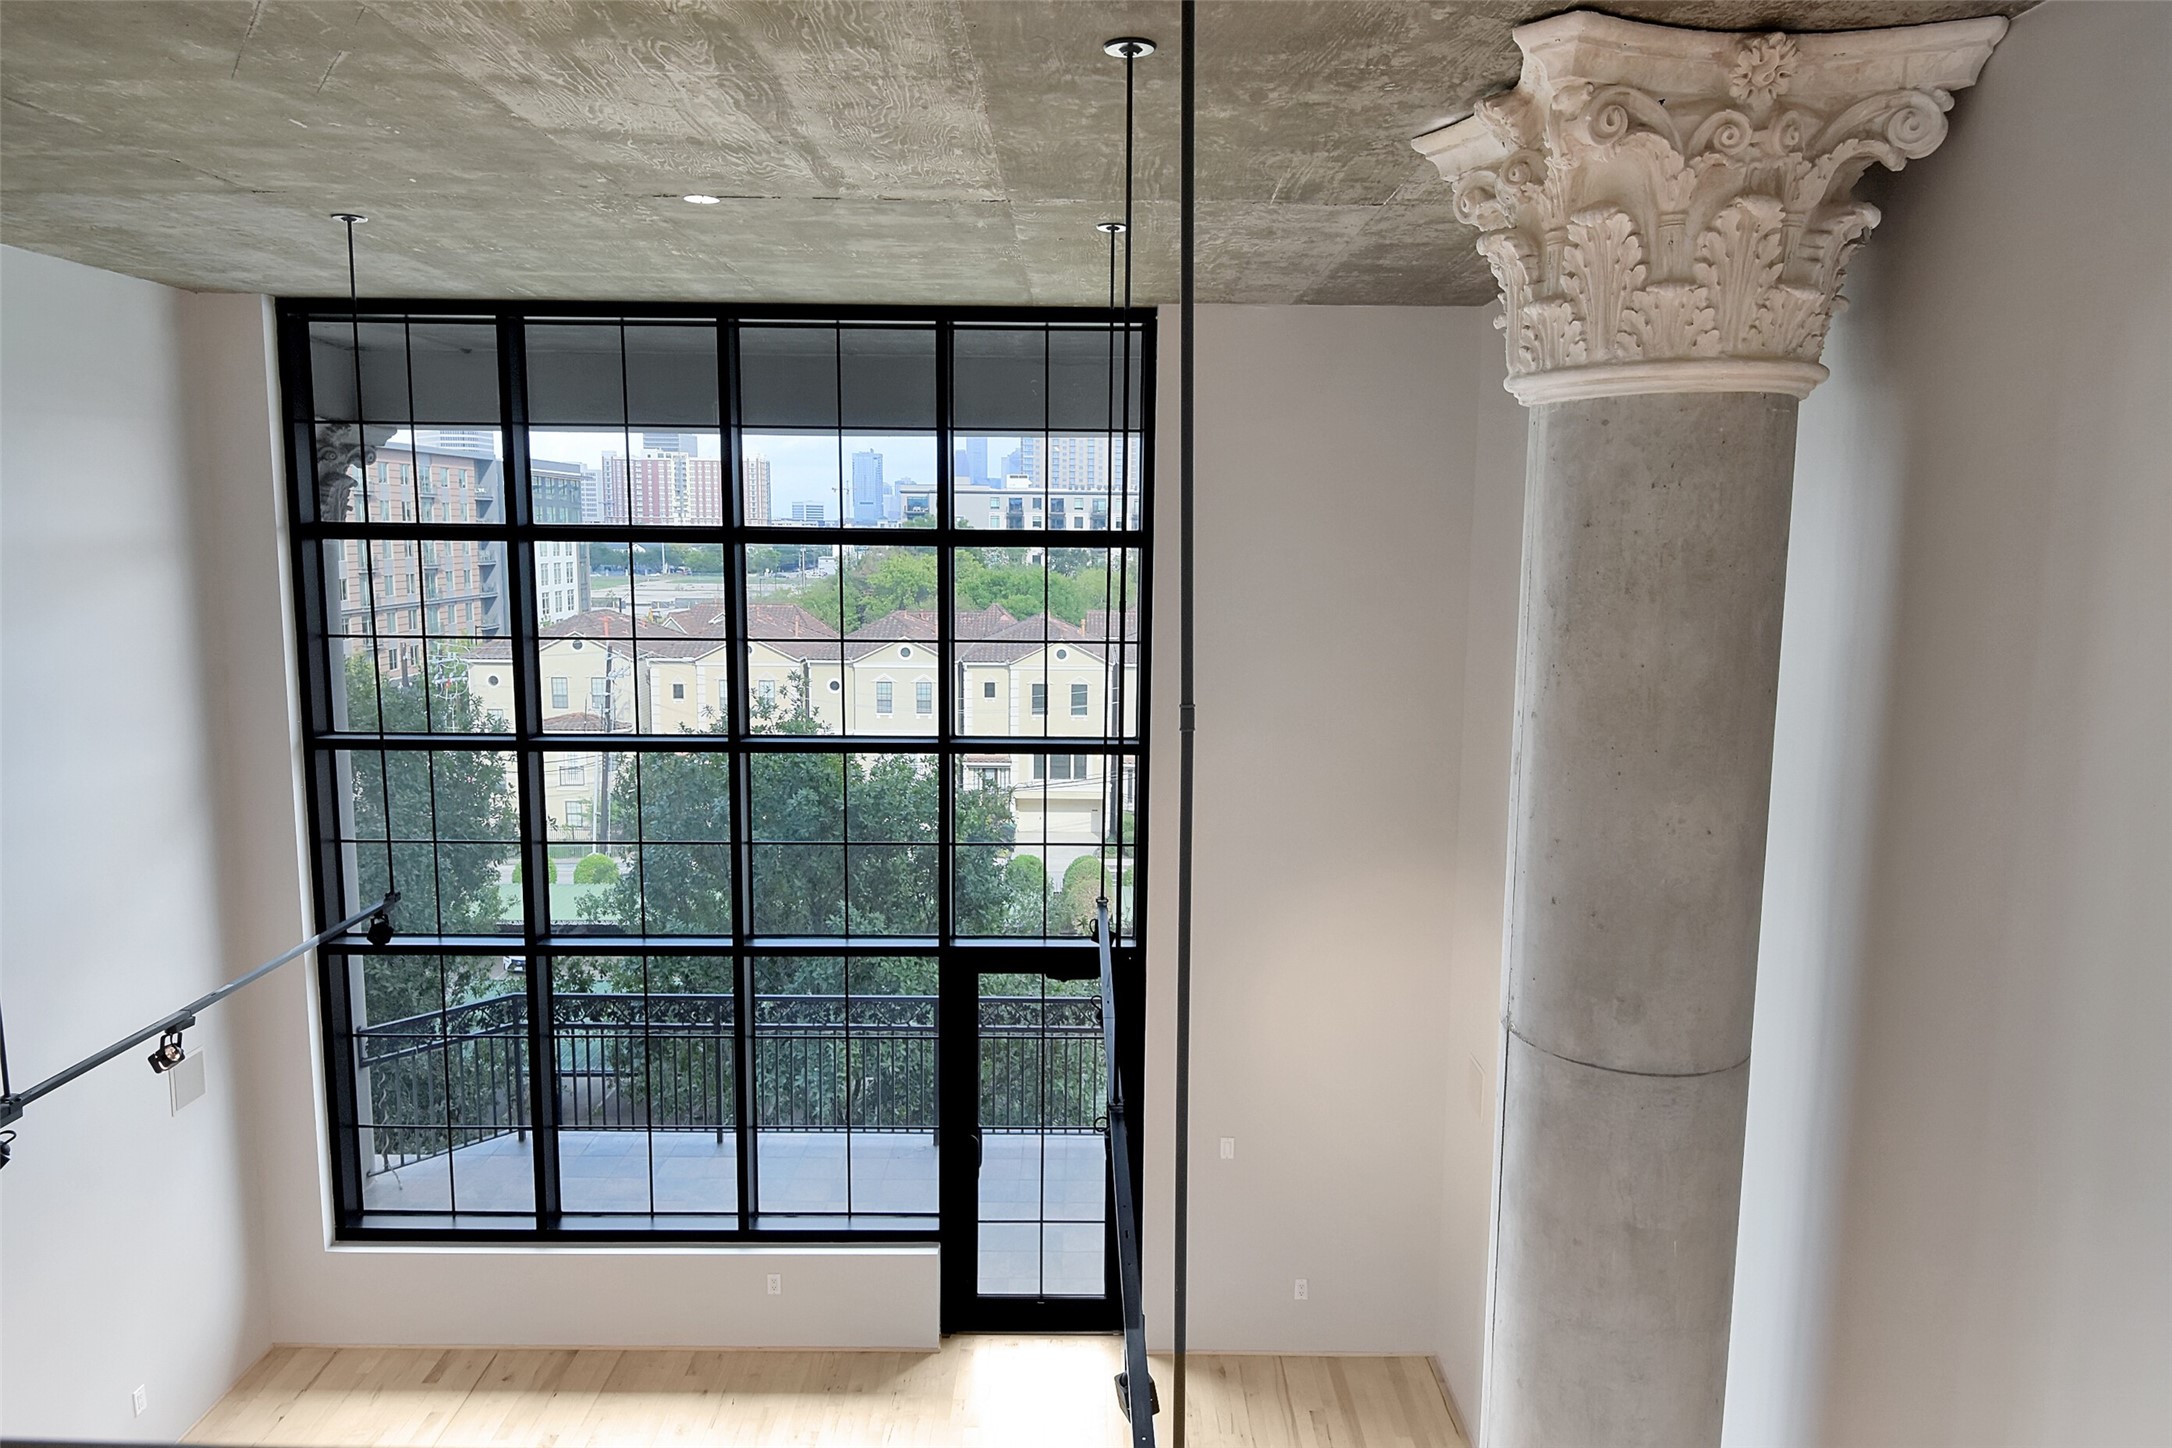 VIEWS OF THE MAIN LIVING AREA WITH IMPOSING ARCHITECTURAL PILLAR AND SPECTACULAR VIEWS OF DOWNTOWN HOUSTON.